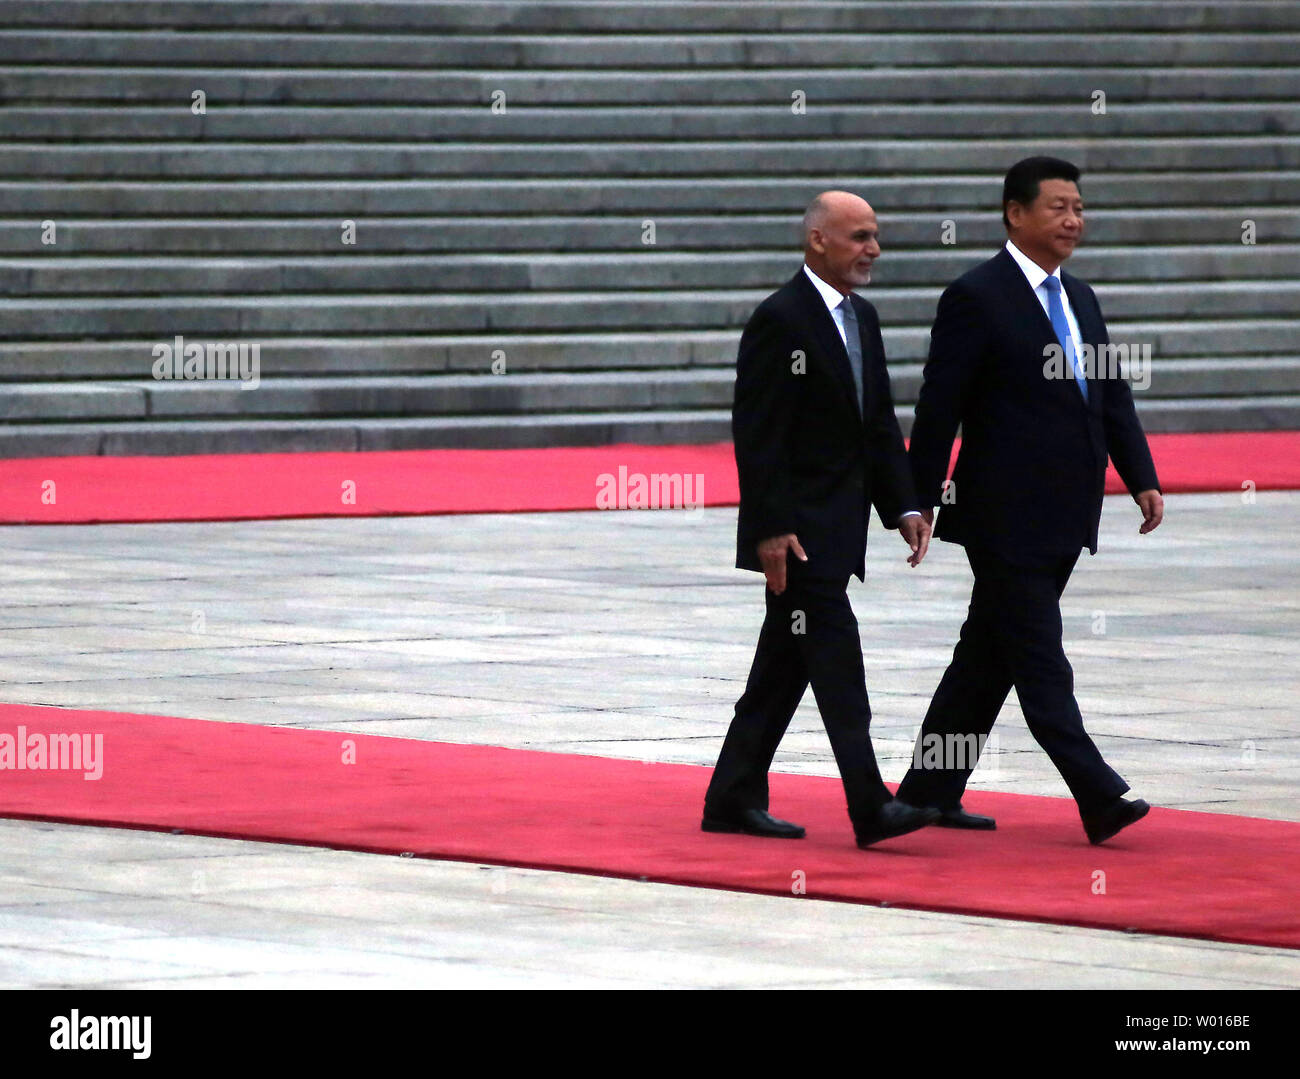 Afghanistan's new President Ashraf Ghani Ahmadzai (L) and Chinese President Xi Jinping attend a welcoming ceremony at the Great Hall of the People in Beijing on October 28, 2014.  The Afghan President is visiting China to seek help in rebuilding his country and boosting regional stability.       UPI/Stephen Shaver Stock Photo